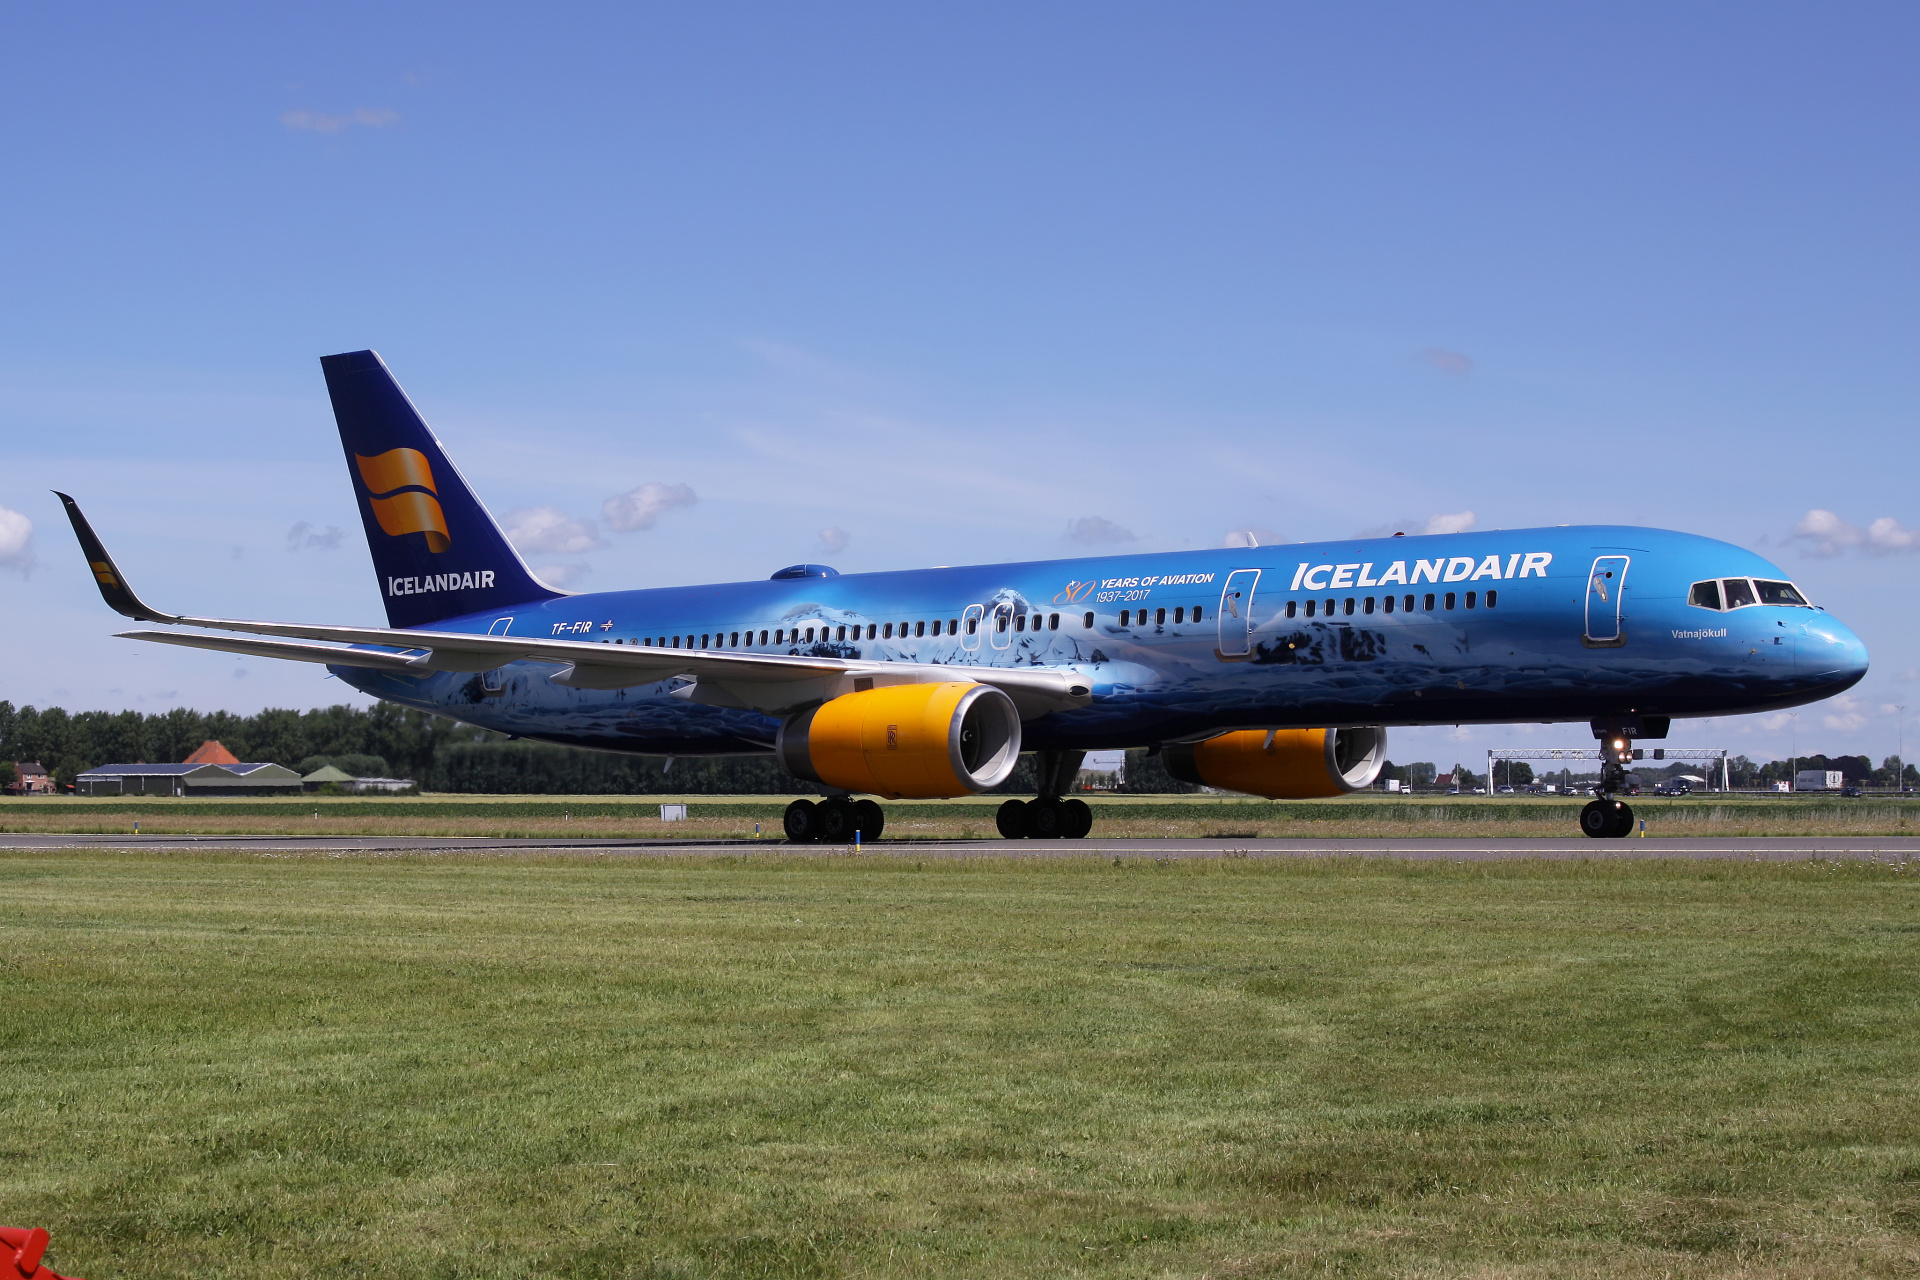 TF-FIR, Icelandair (80 Years of Aviation livery) (Aircraft » Schiphol Spotting » Boeing 757-200)